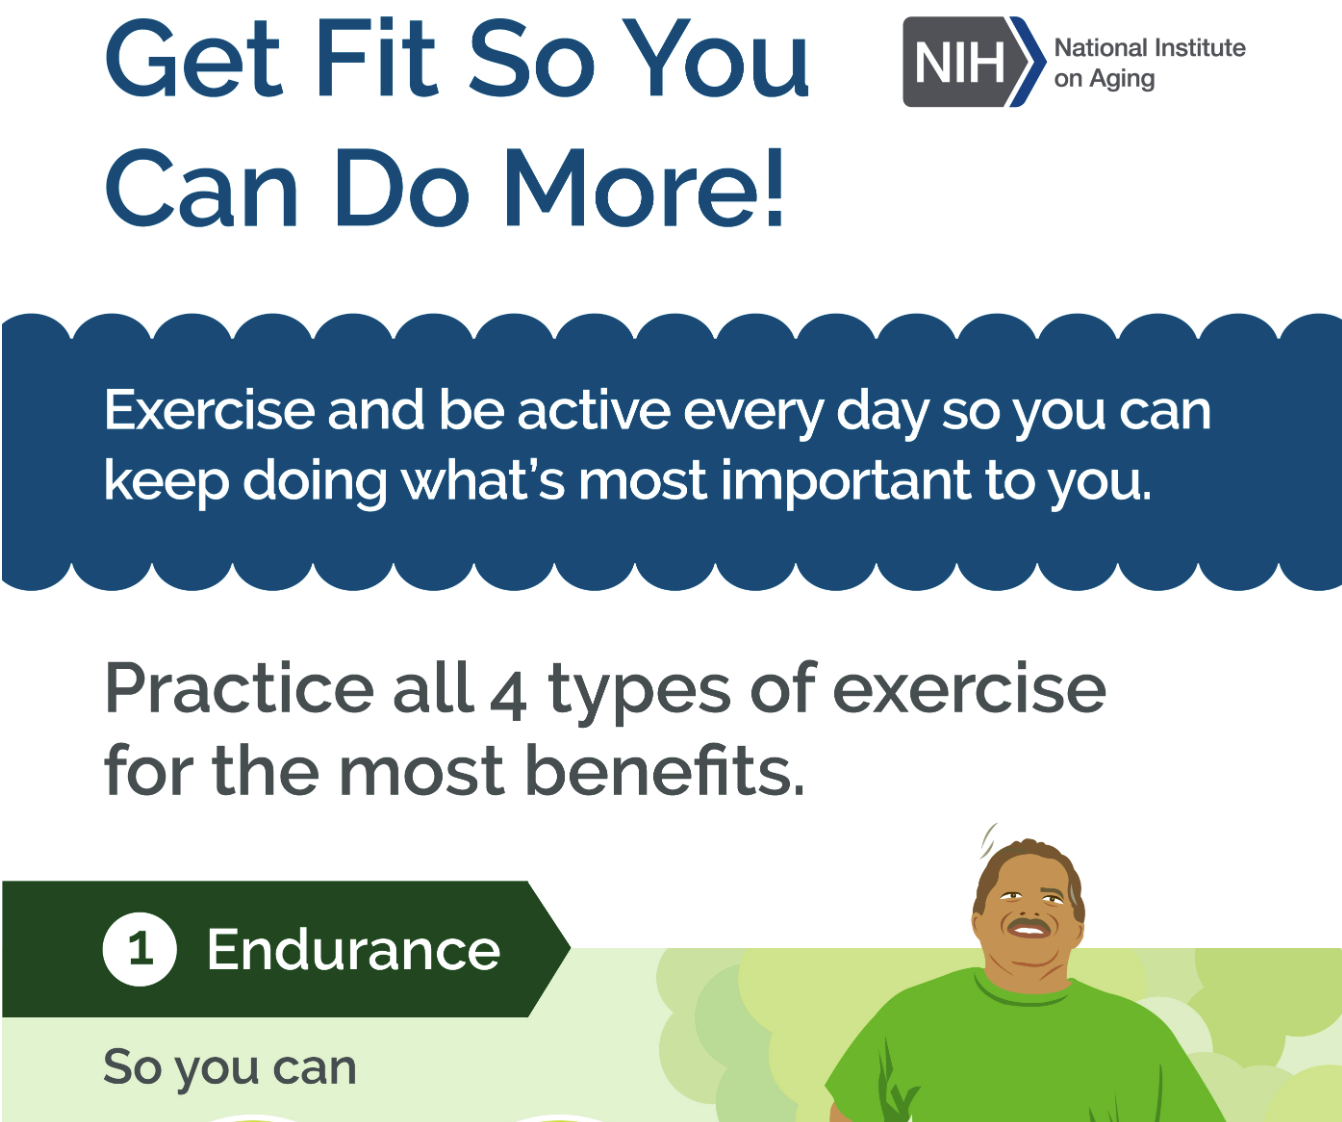 Four Types of Exercise Can Improve Your Health and Physical Ability